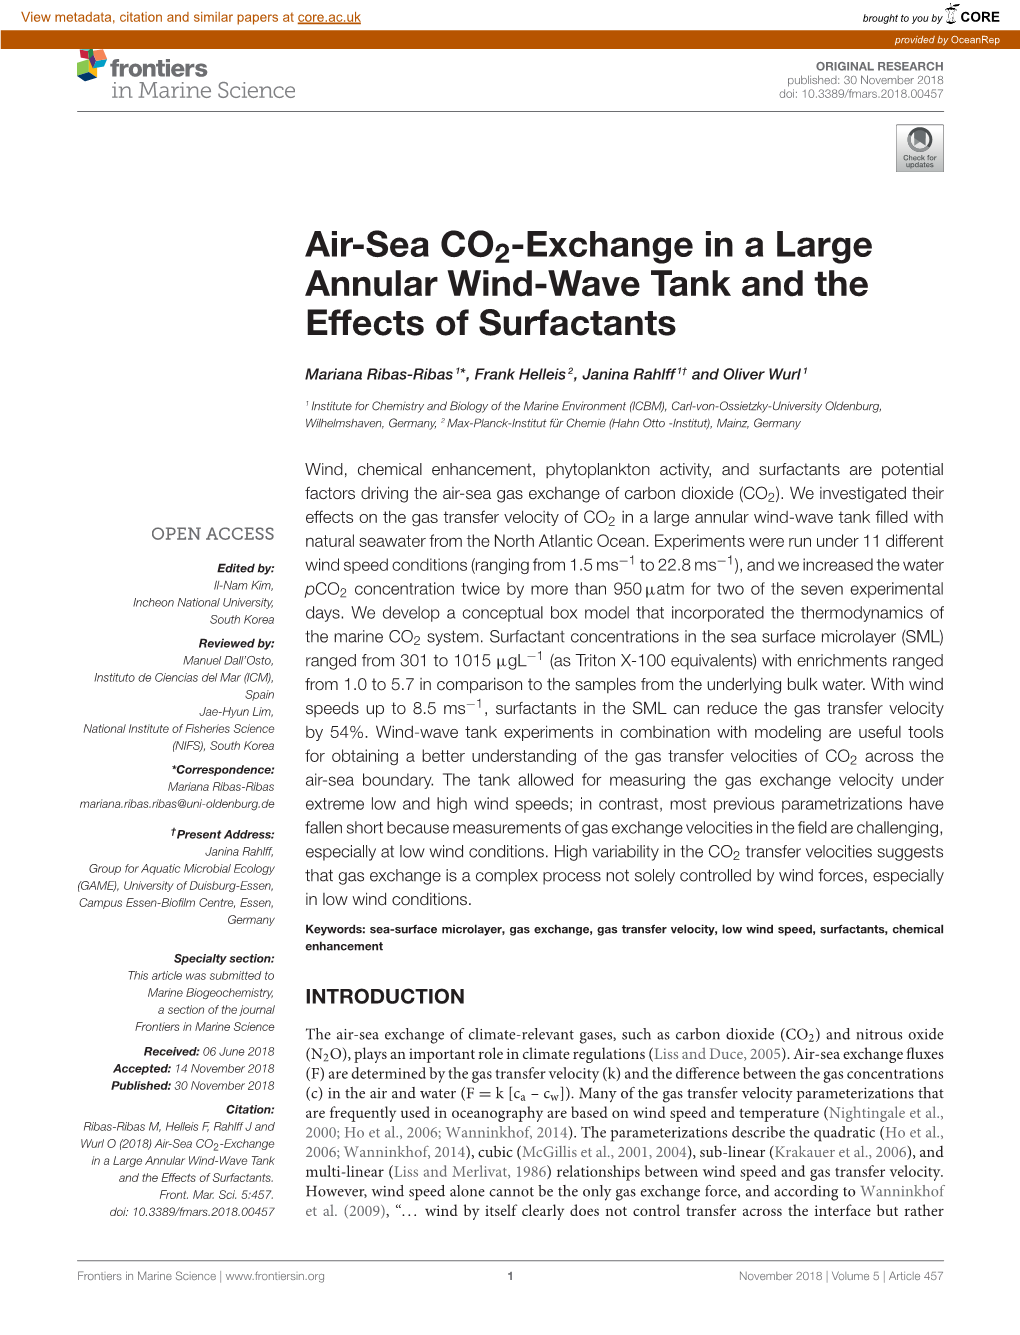 Air-Sea CO2-Exchange in a Large Annular Wind-Wave Tank and the Effects of Surfactants